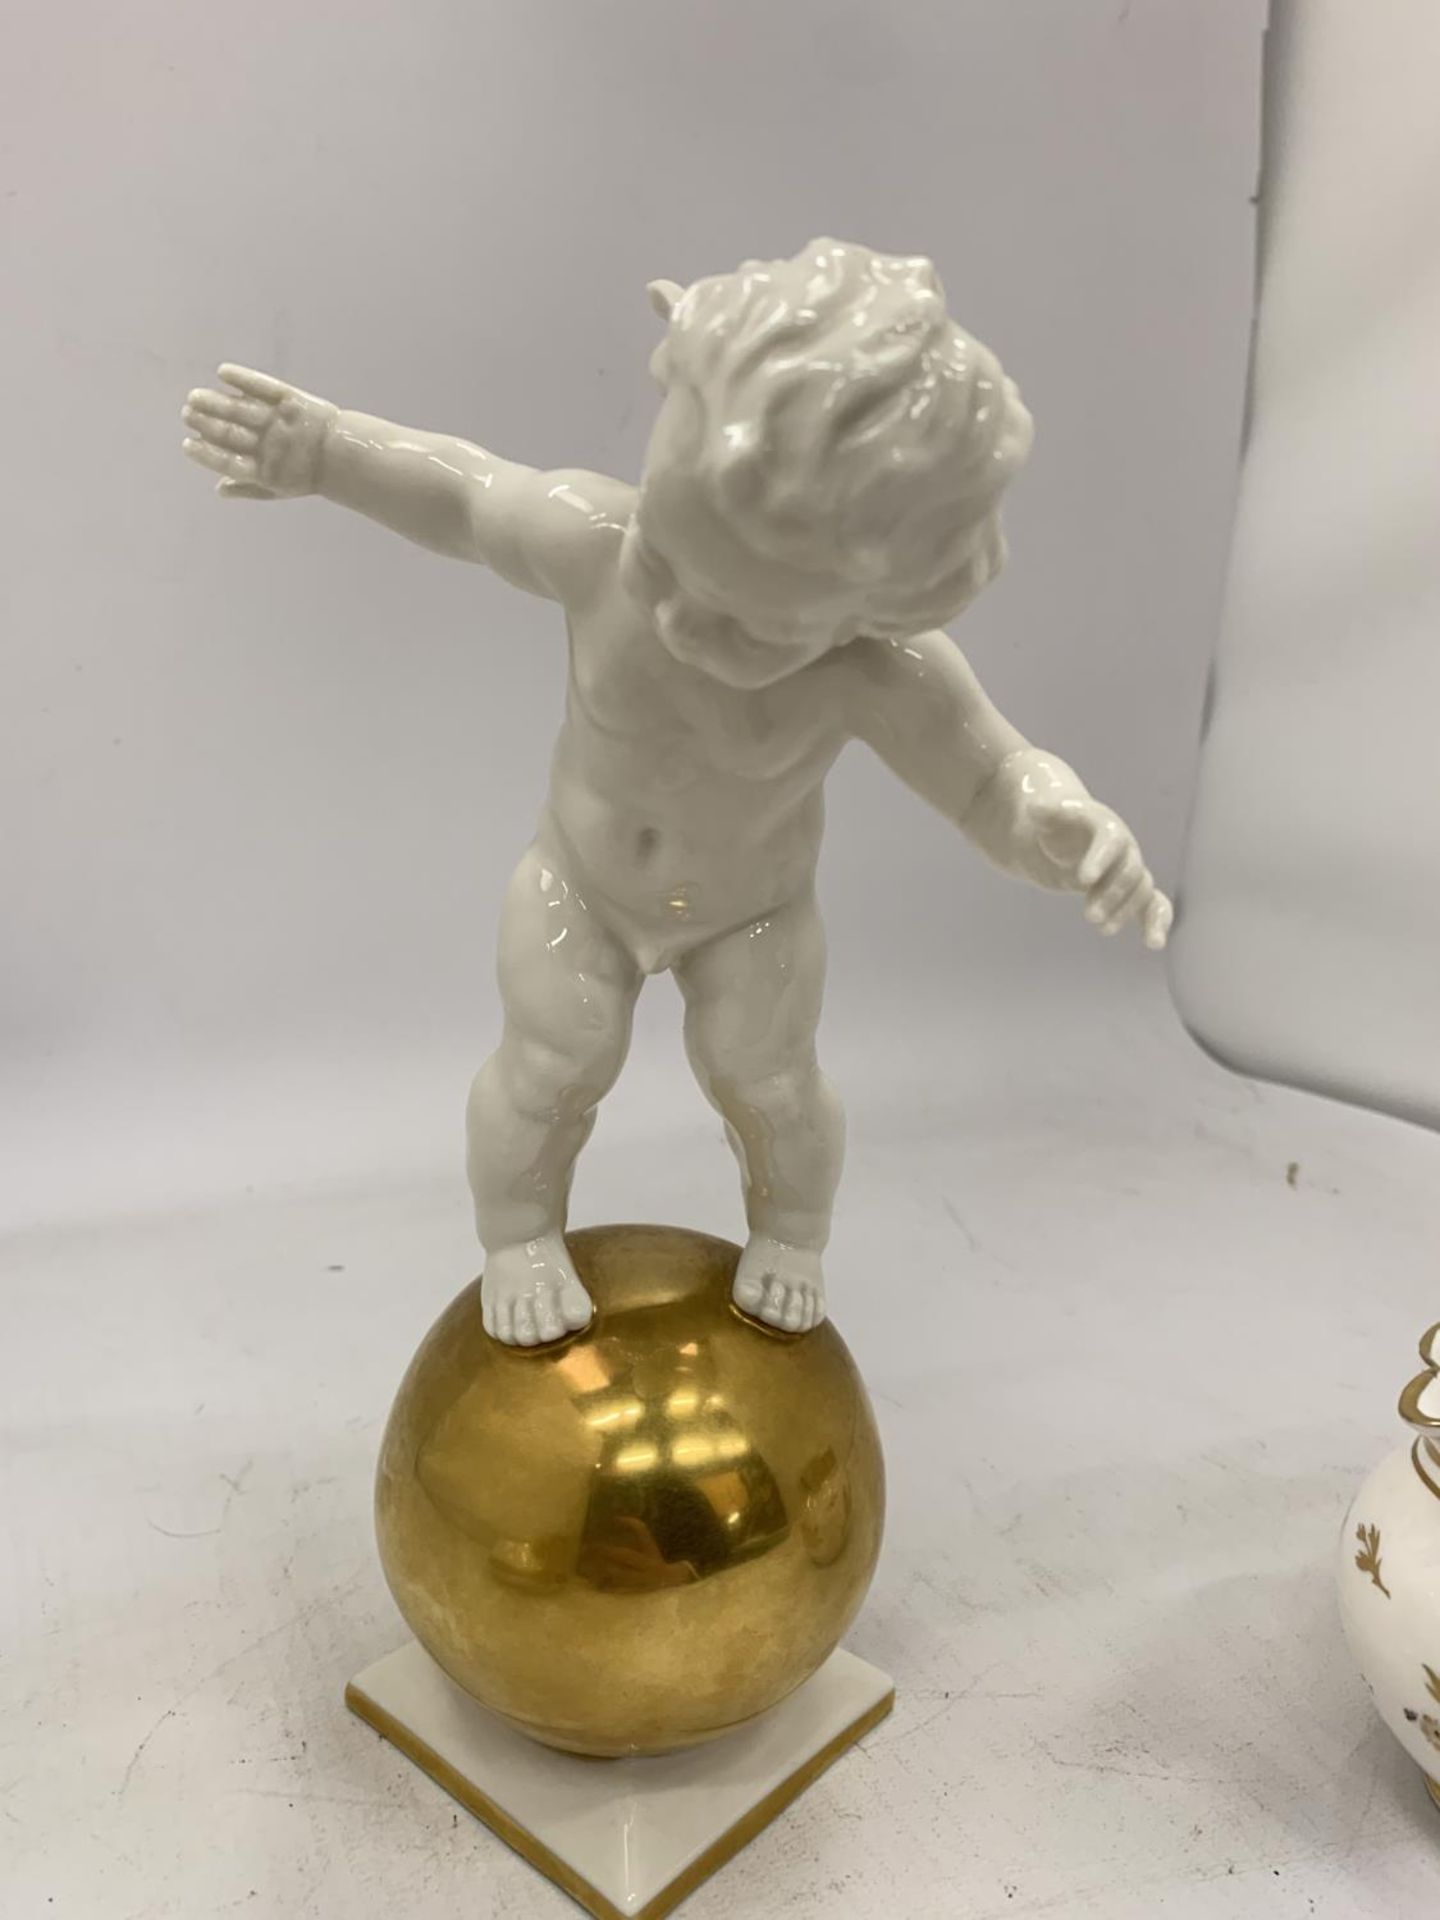 A GERMAN FIGURE OF A CHERUB ON A GILT ORB, SIGNED TO THE BASE AND IMPRESSED WITH THE NAME K. TUTTER, - Image 4 of 6